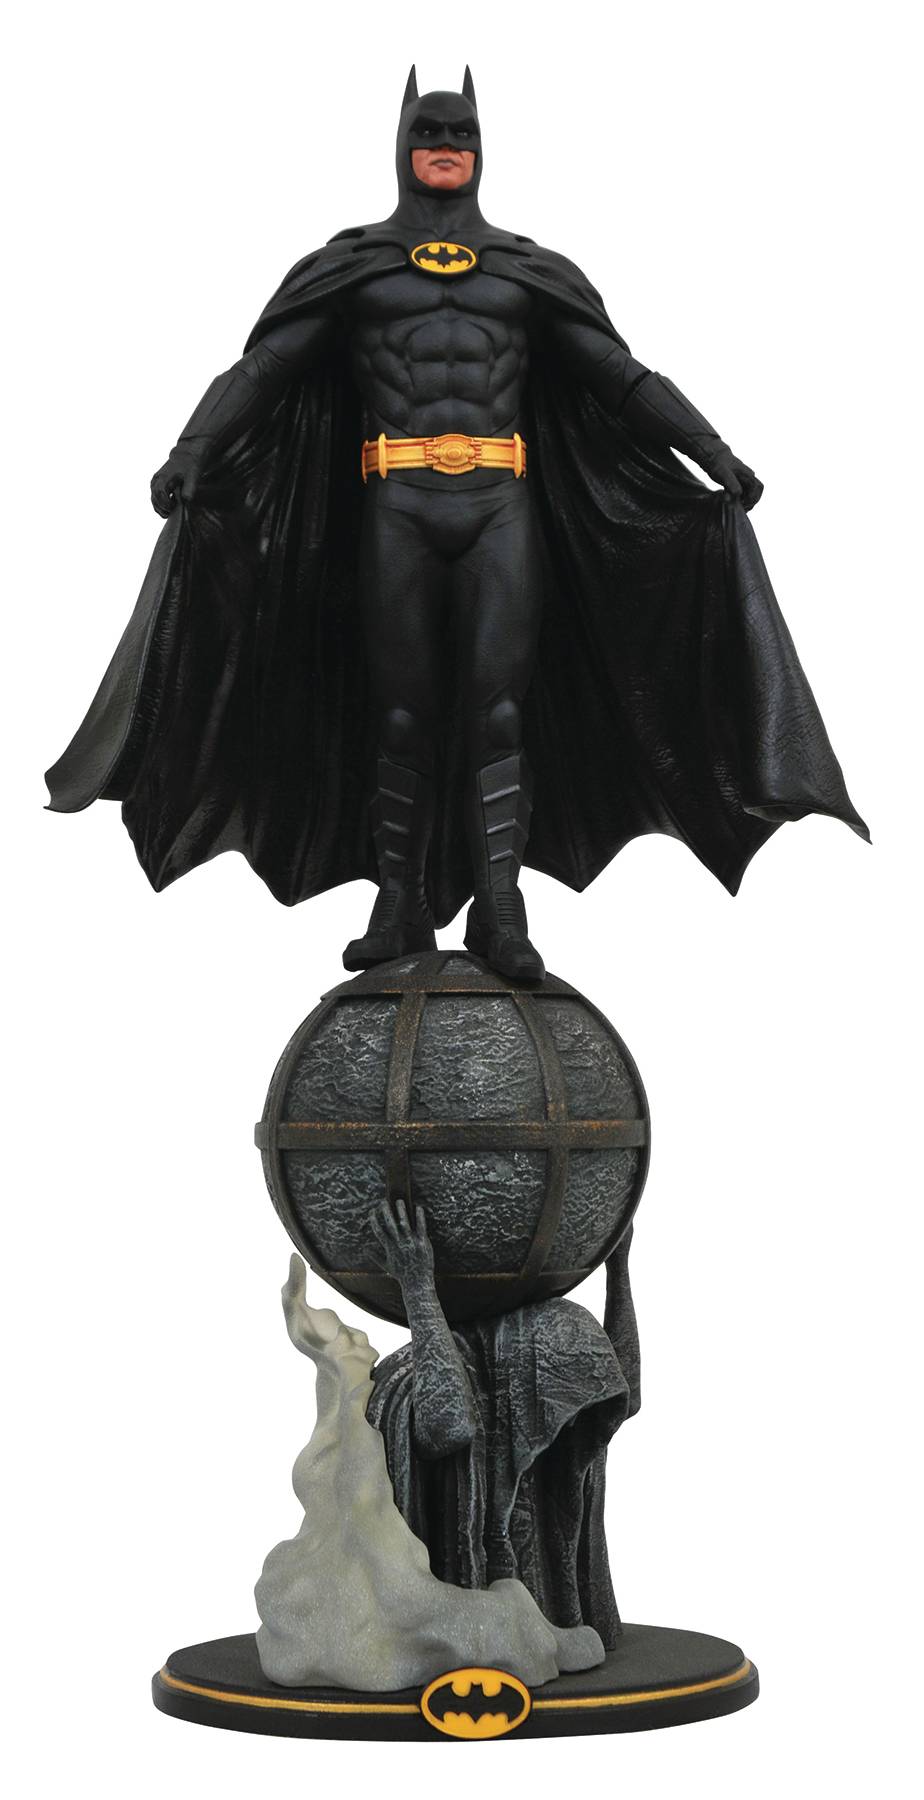 Dc Gallery Batman 1989 Movie Pvc Statue - Action Figure - The Hooded Goblin